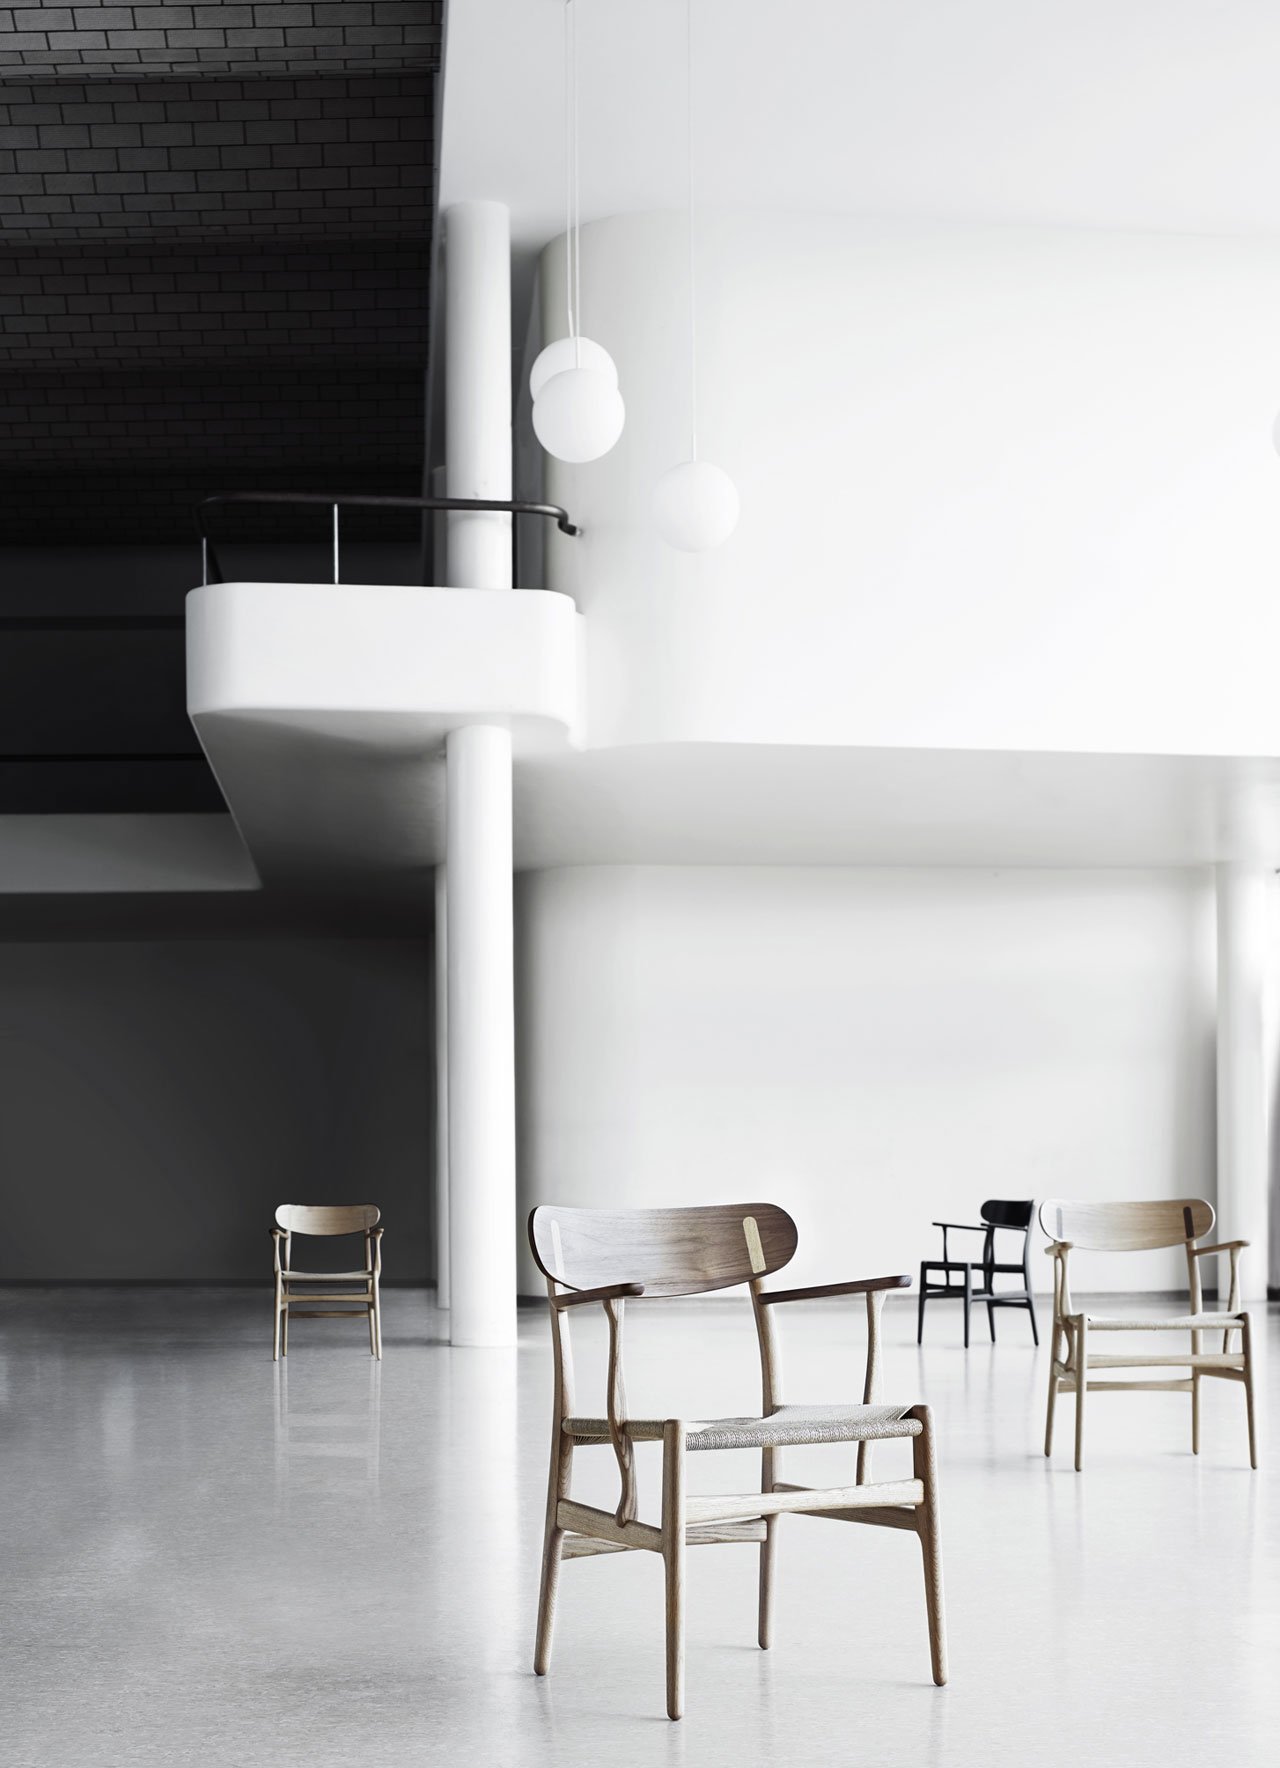 Carl Hansen &amp; Son has recreated one of Hans J. Wegner’s early designs: the 1950 CH22 lounge chair, which bears the first actual model number from the first joint collection between the innovative designer and the Danish furniture manufacturer. 